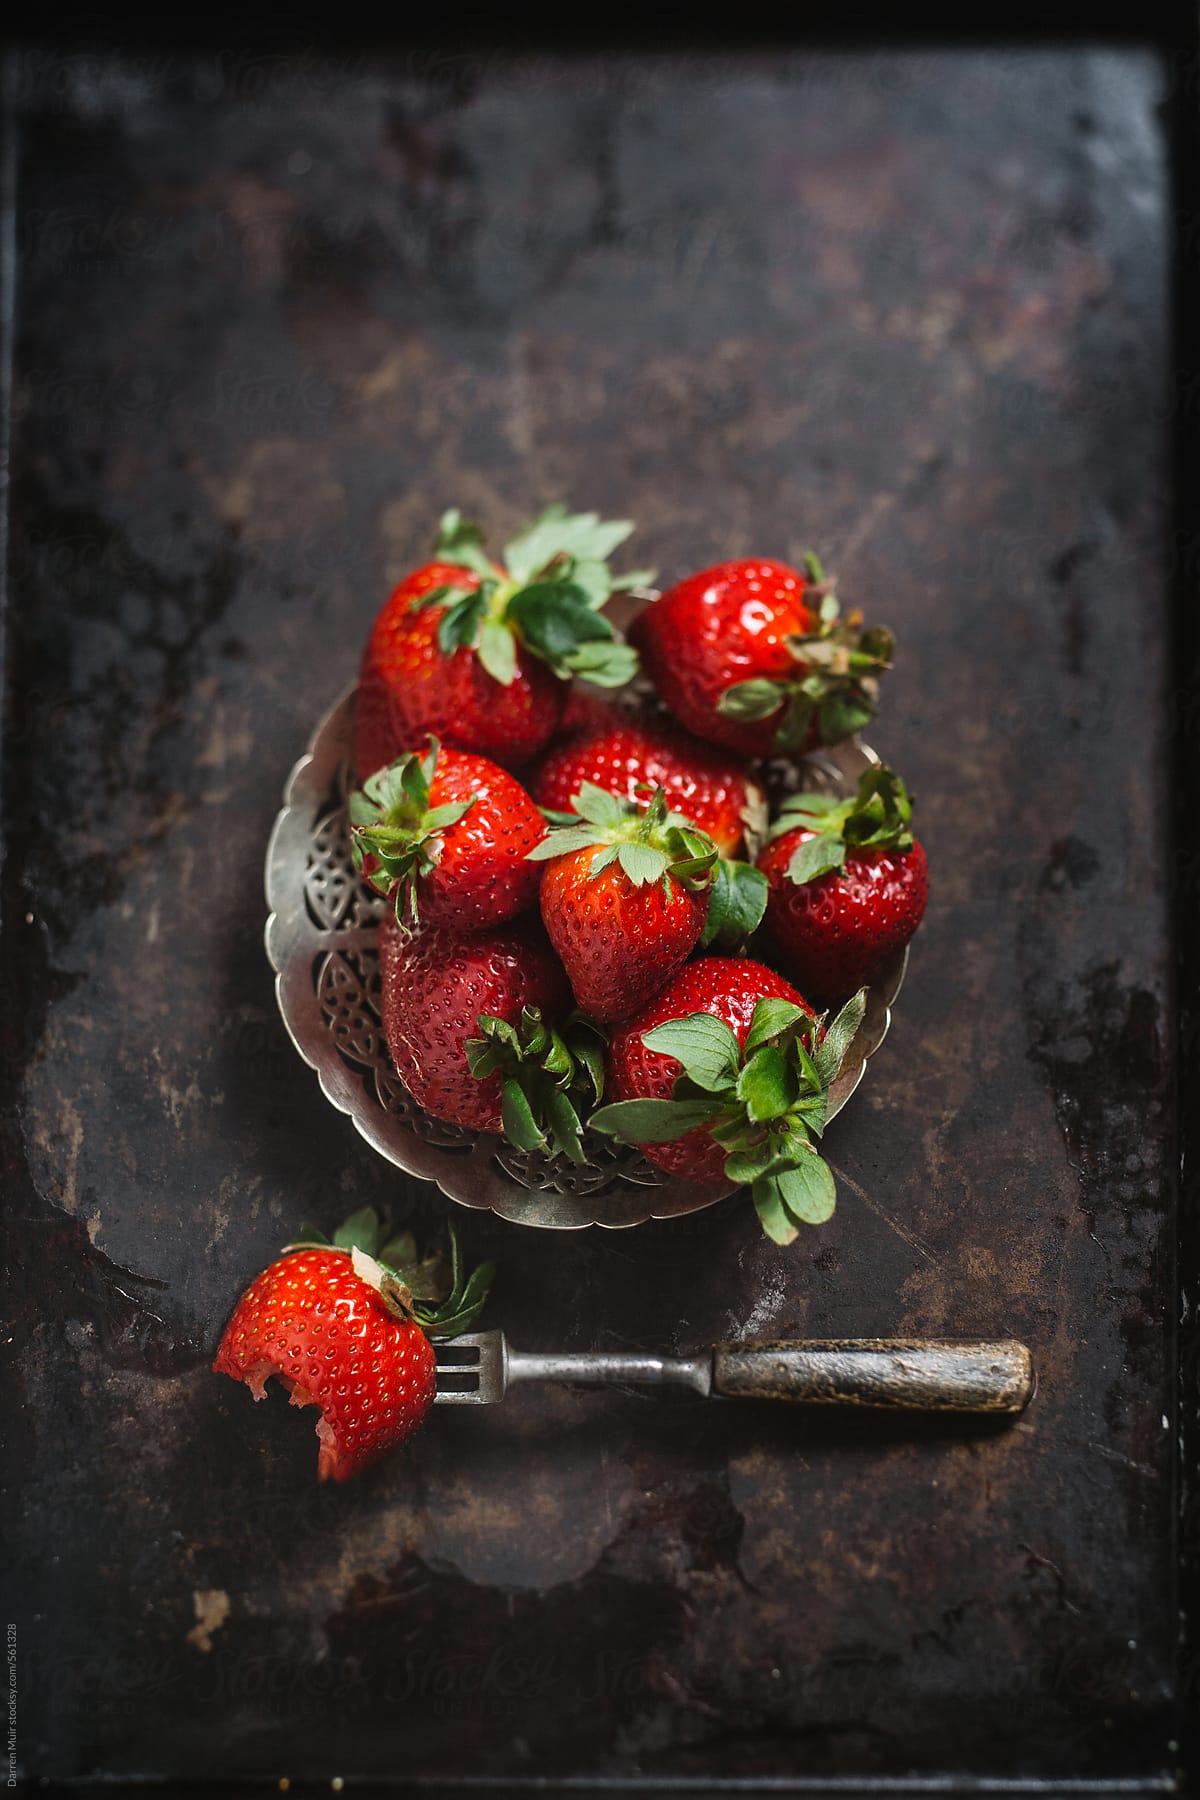 Fresh strawberry's on metal background with fork, one with a bite out of it. Seen from above.